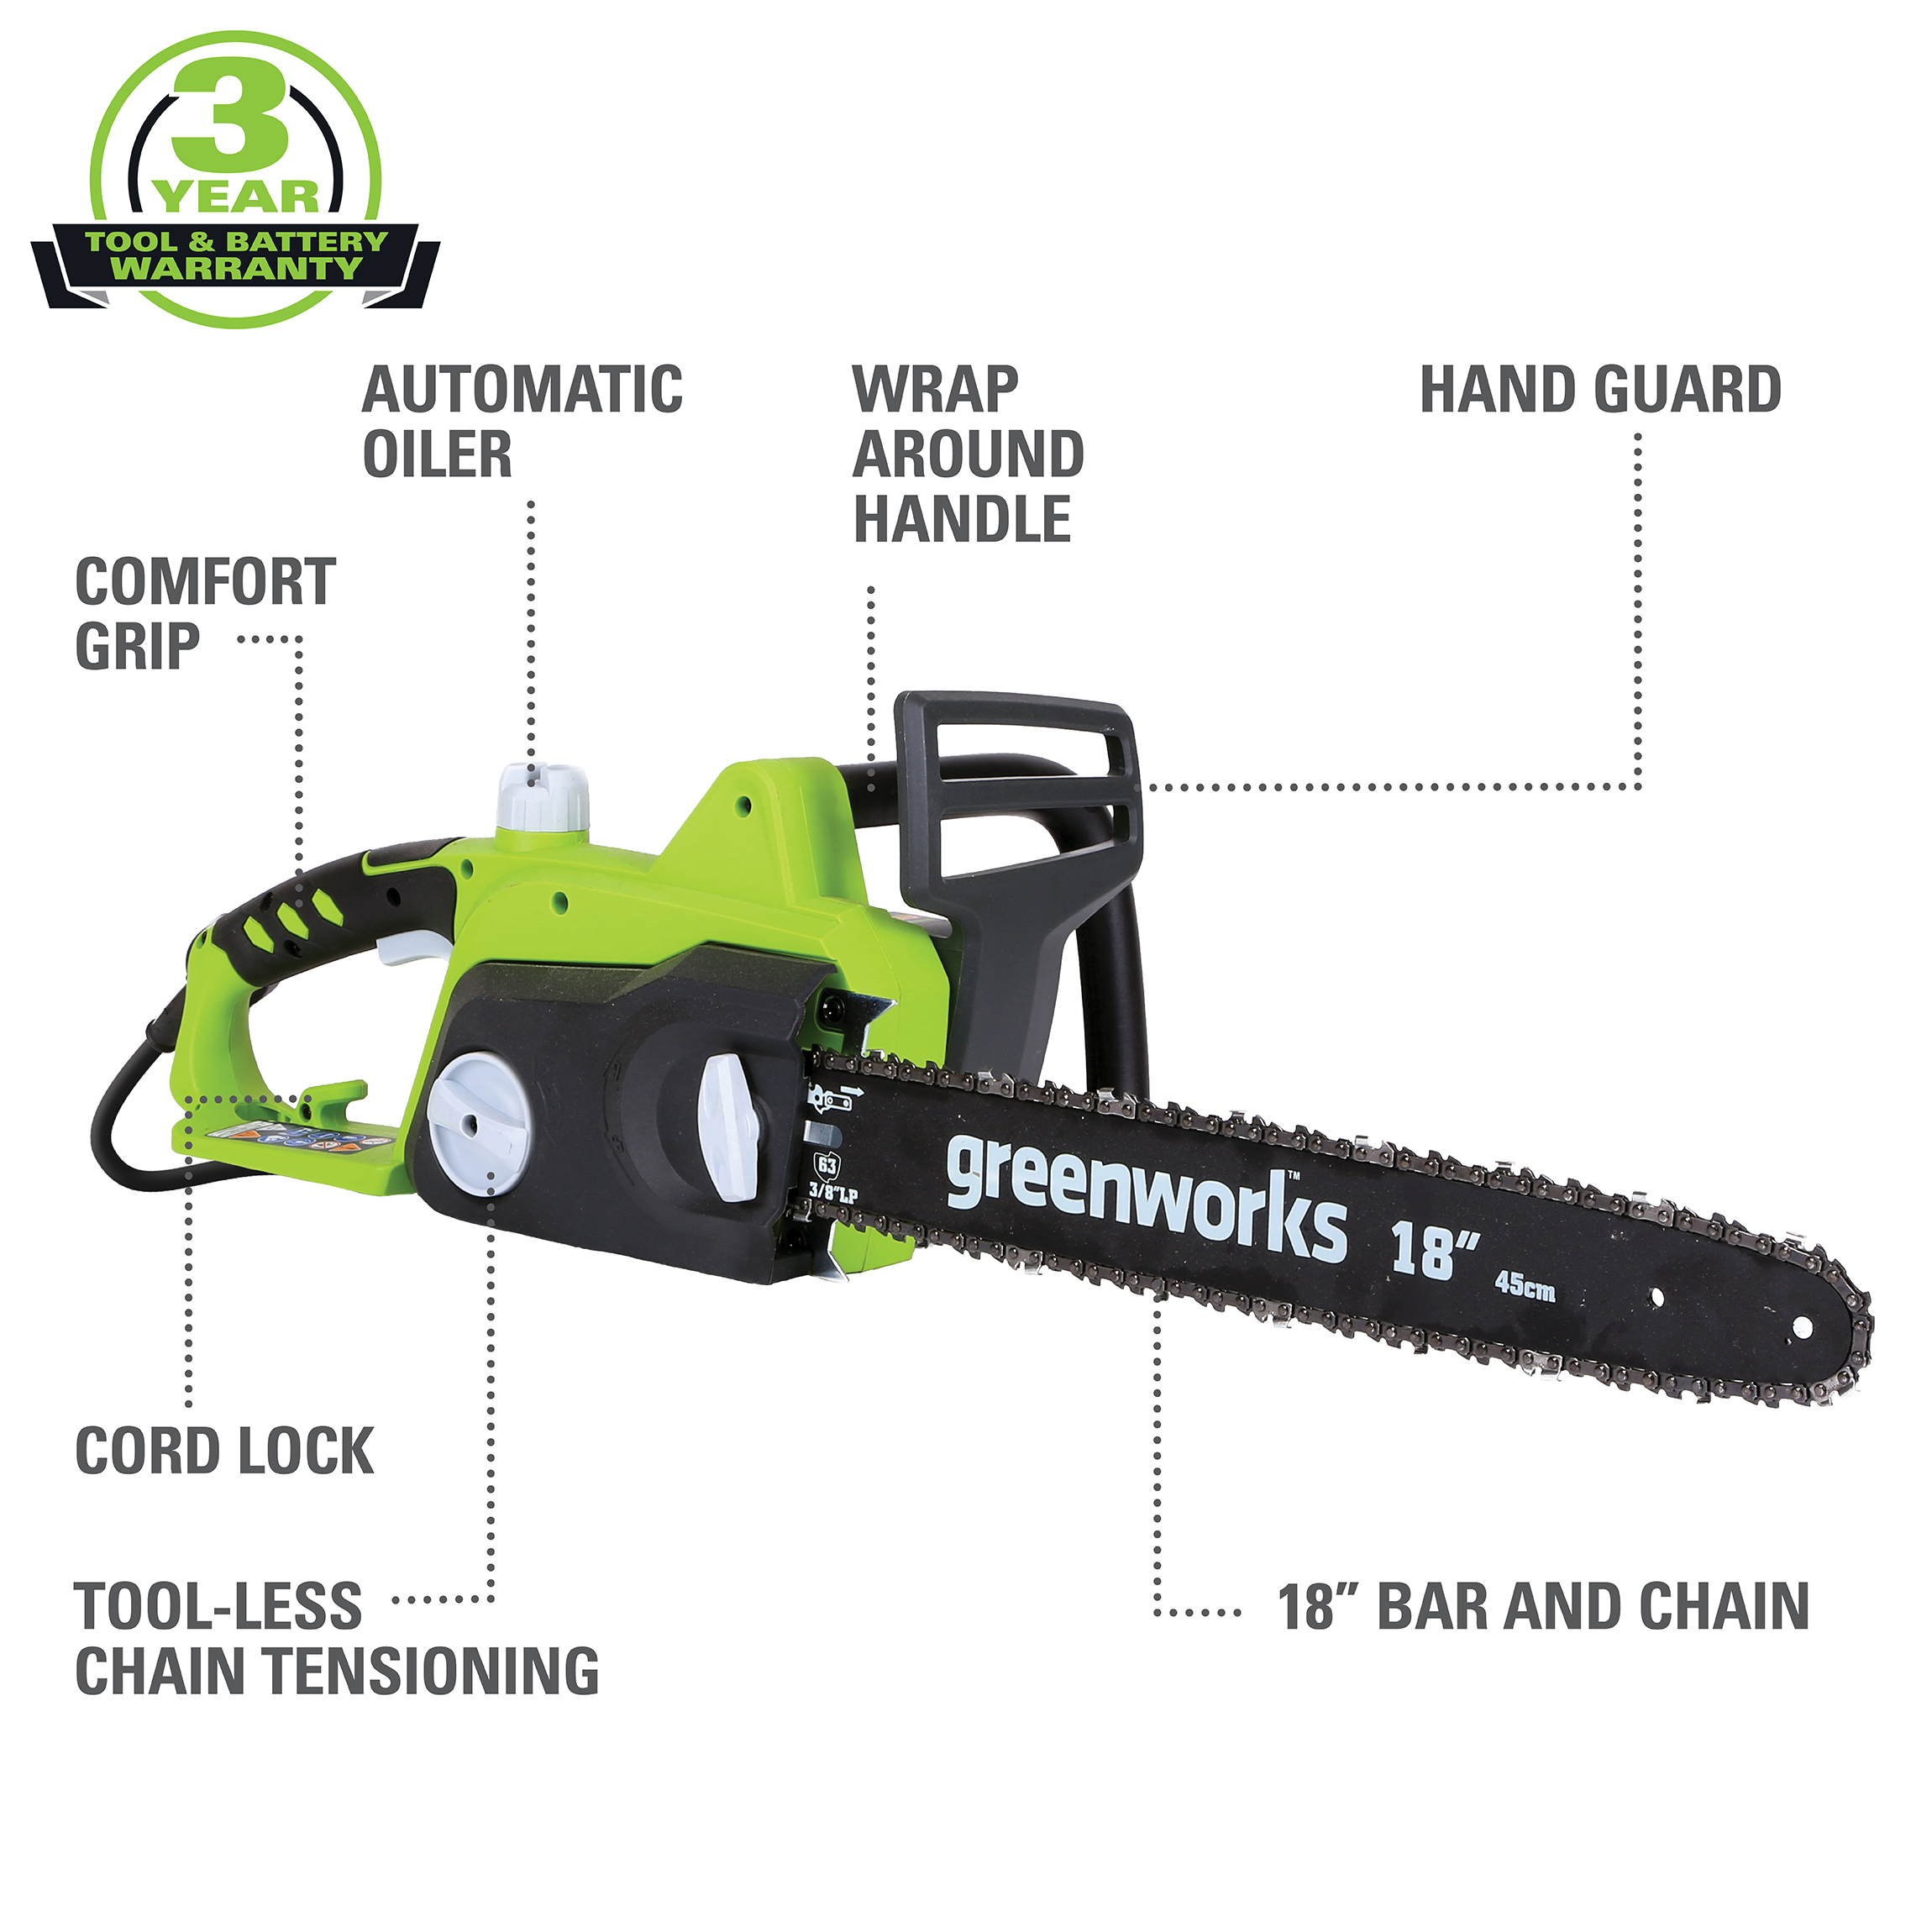 Greenworks 14.5 Amp 18" Corded Electric Chainsaw 20332 - image 3 of 14